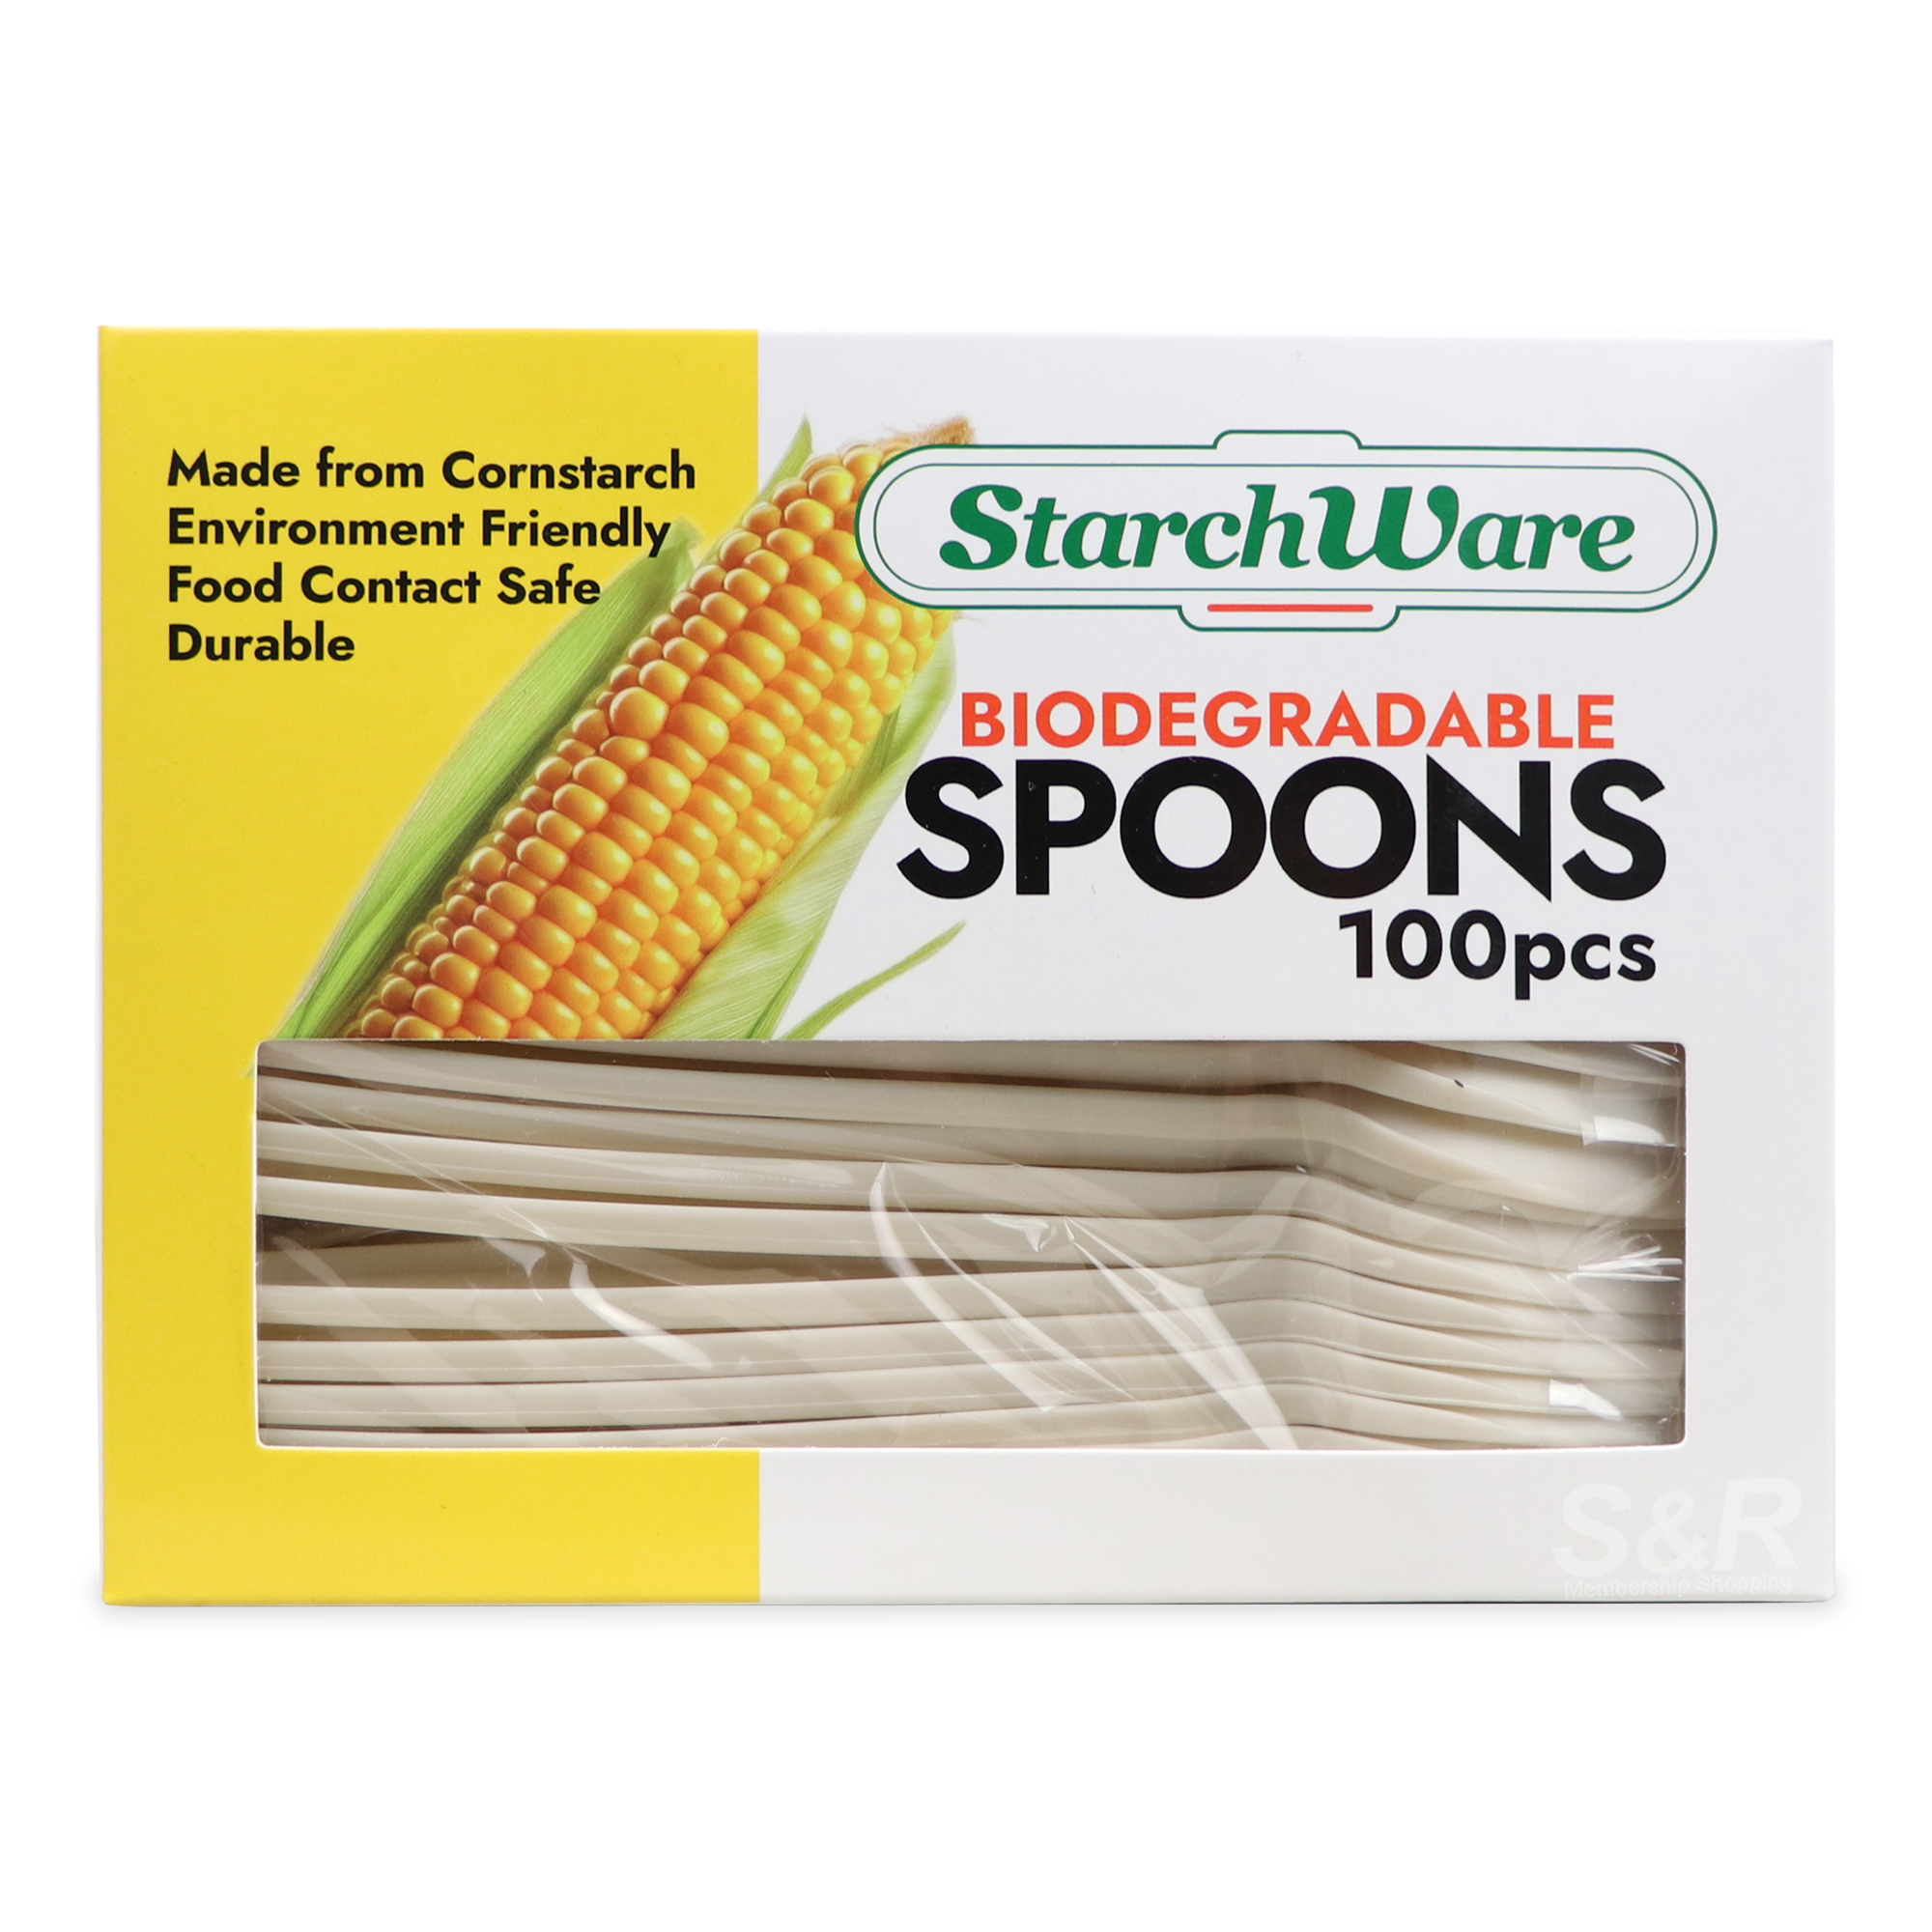 Starch Ware Biodegradable Spoons 100pcs